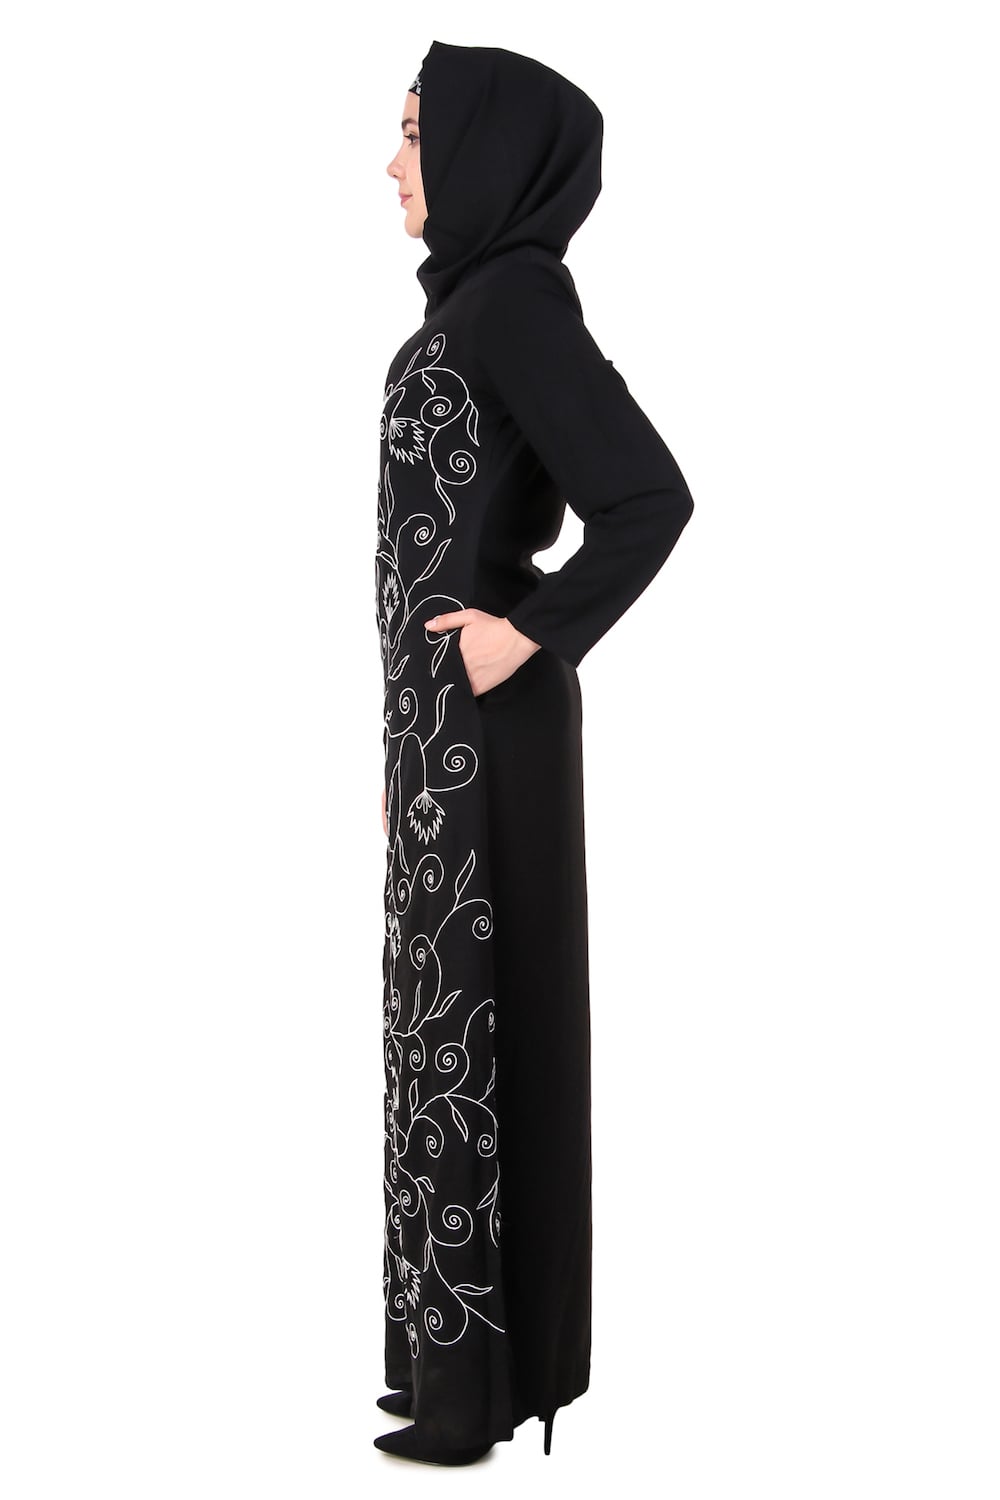 Front Floral Embroidered A-Line Abaya Side